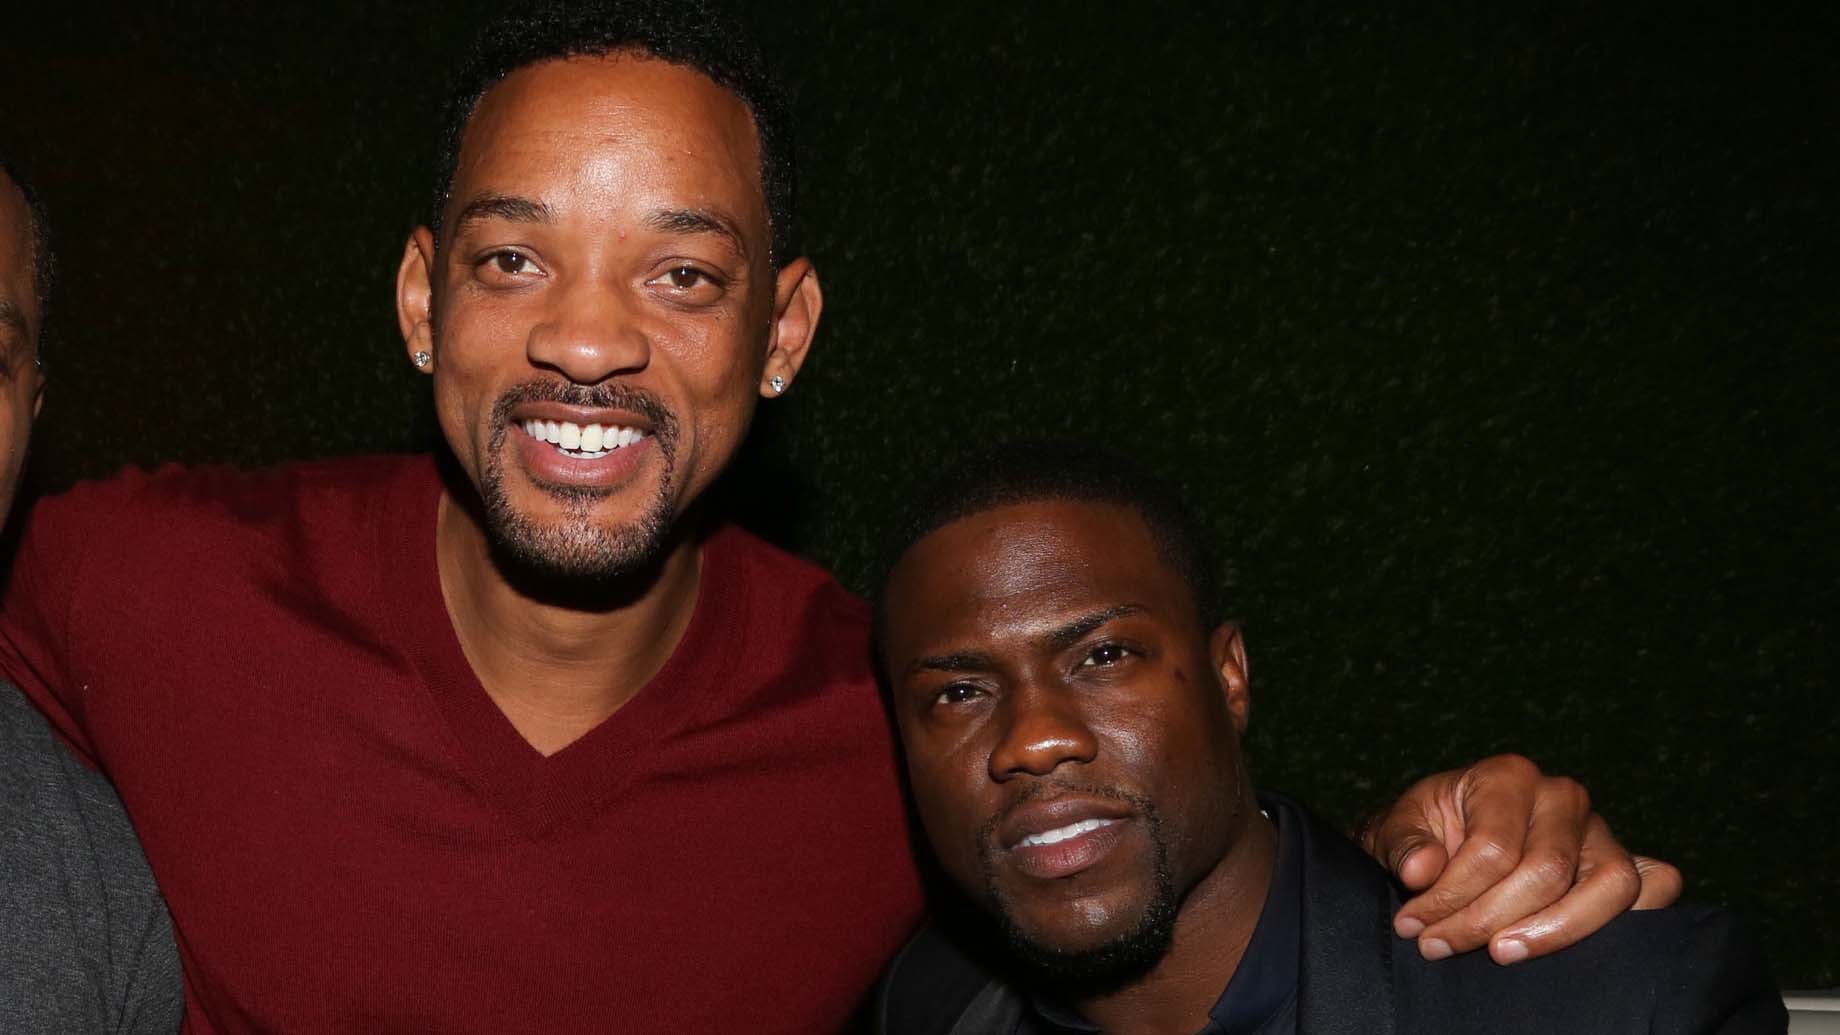 will Smith Is Apologetic In A Better Place After Oscars Slap Says Kevin Hart Exclusive Entertainment Tonight